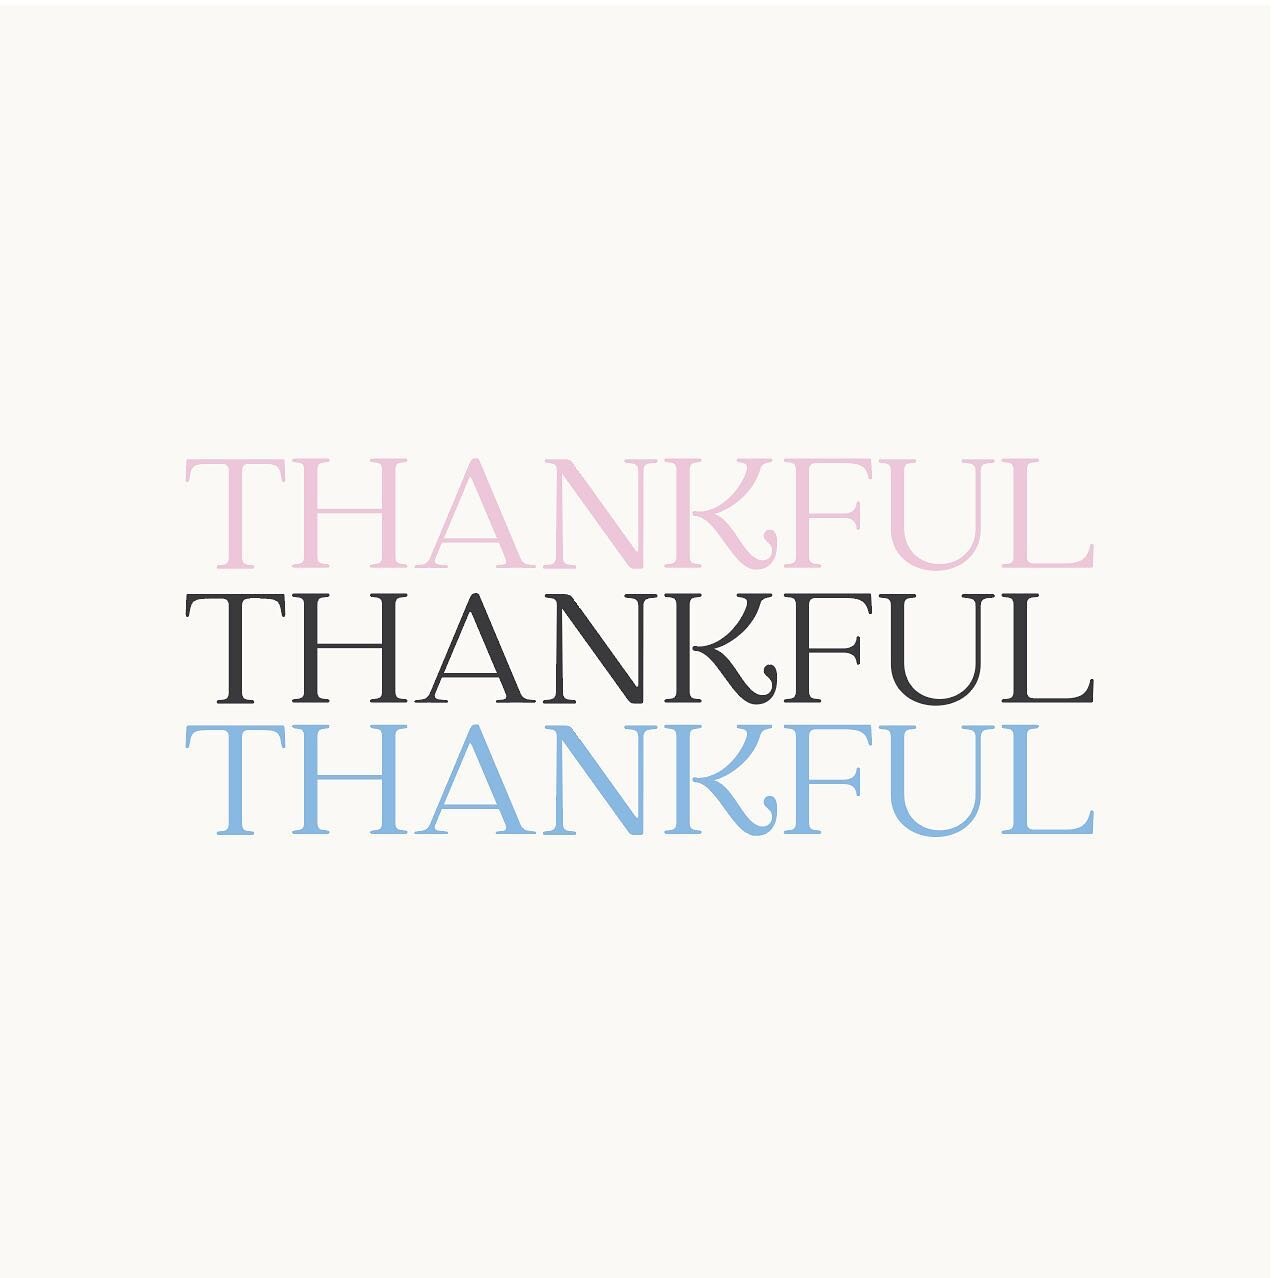 It can be hard in a time like now to lose sight of the blessings we have and what we have to thankful for.

I am: 
~ Thankful for friends and family 
~ Thankful for technology to communicate with loved ones 
~ Thankful for a health care system who ca